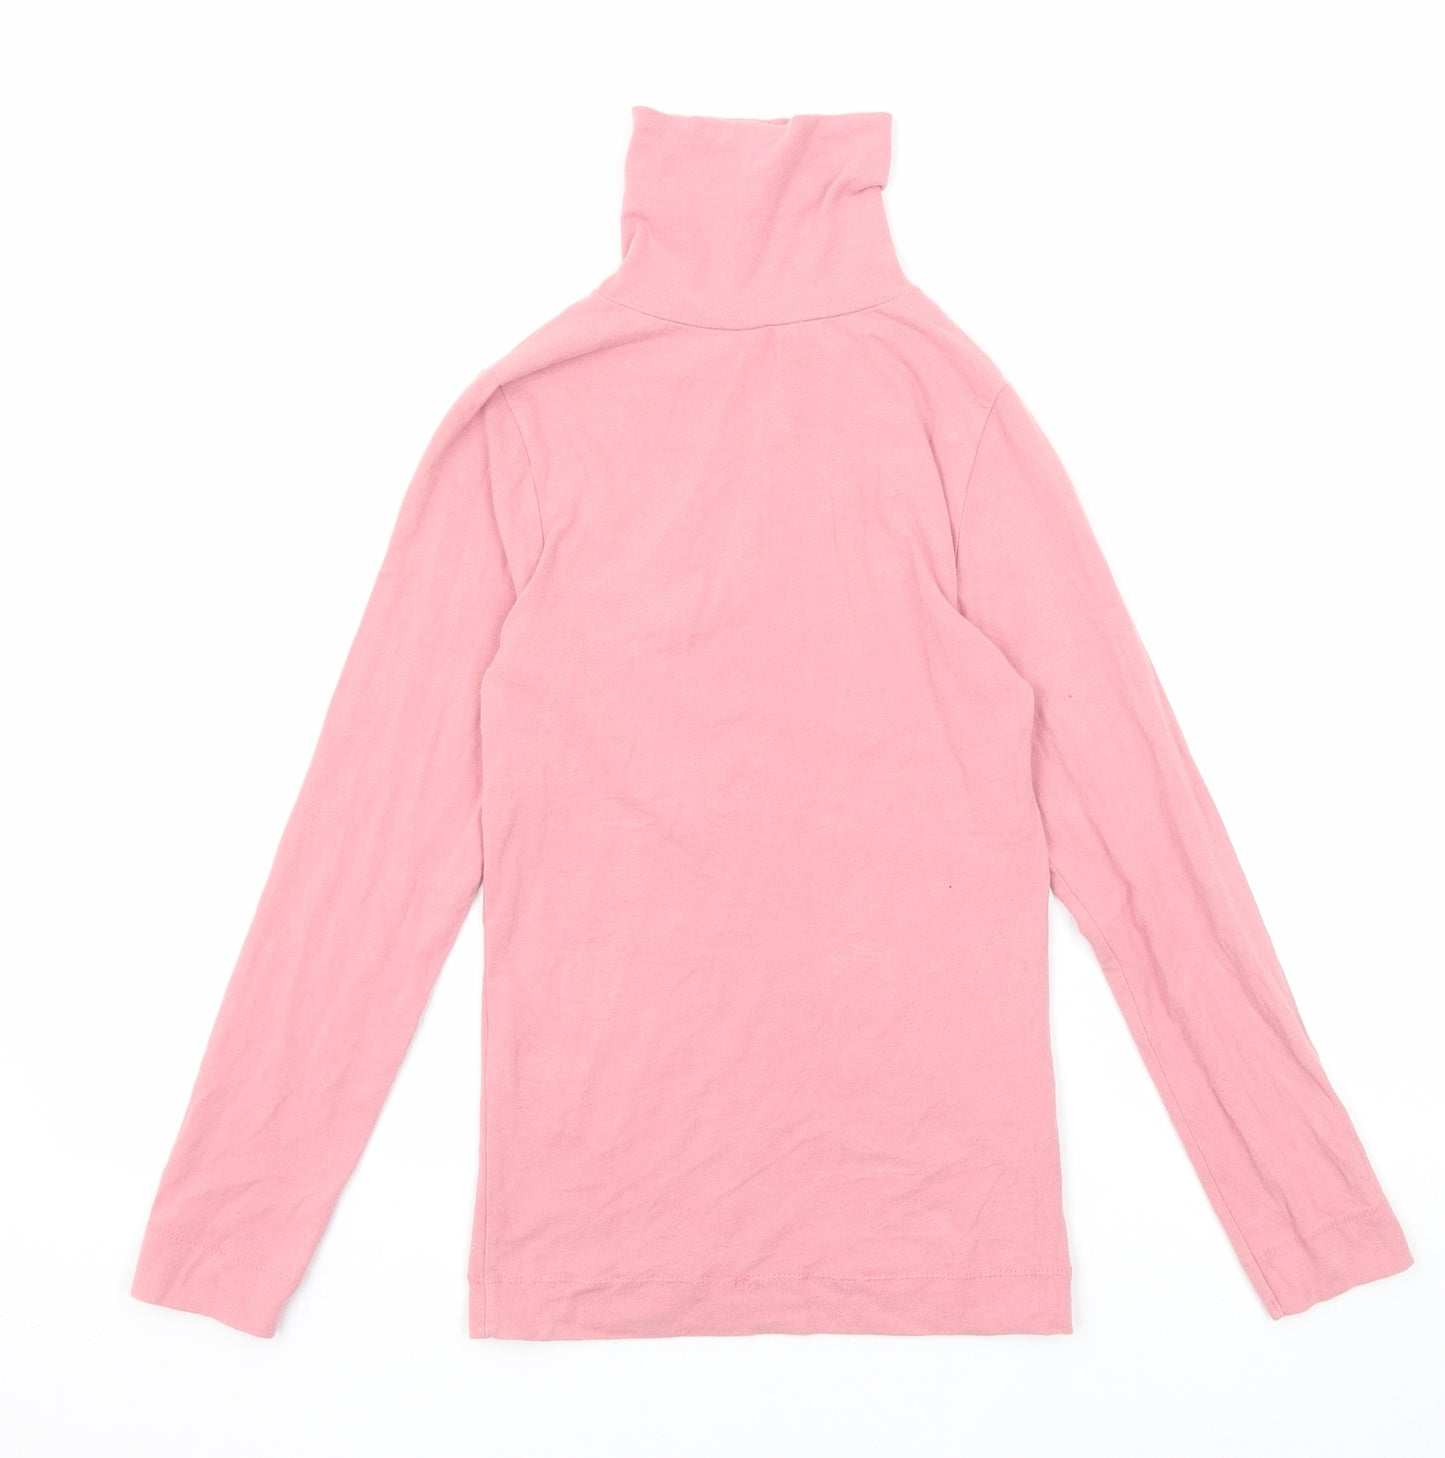 COLLUSION Womens Pink Cotton Basic T-Shirt Size 6 Roll Neck